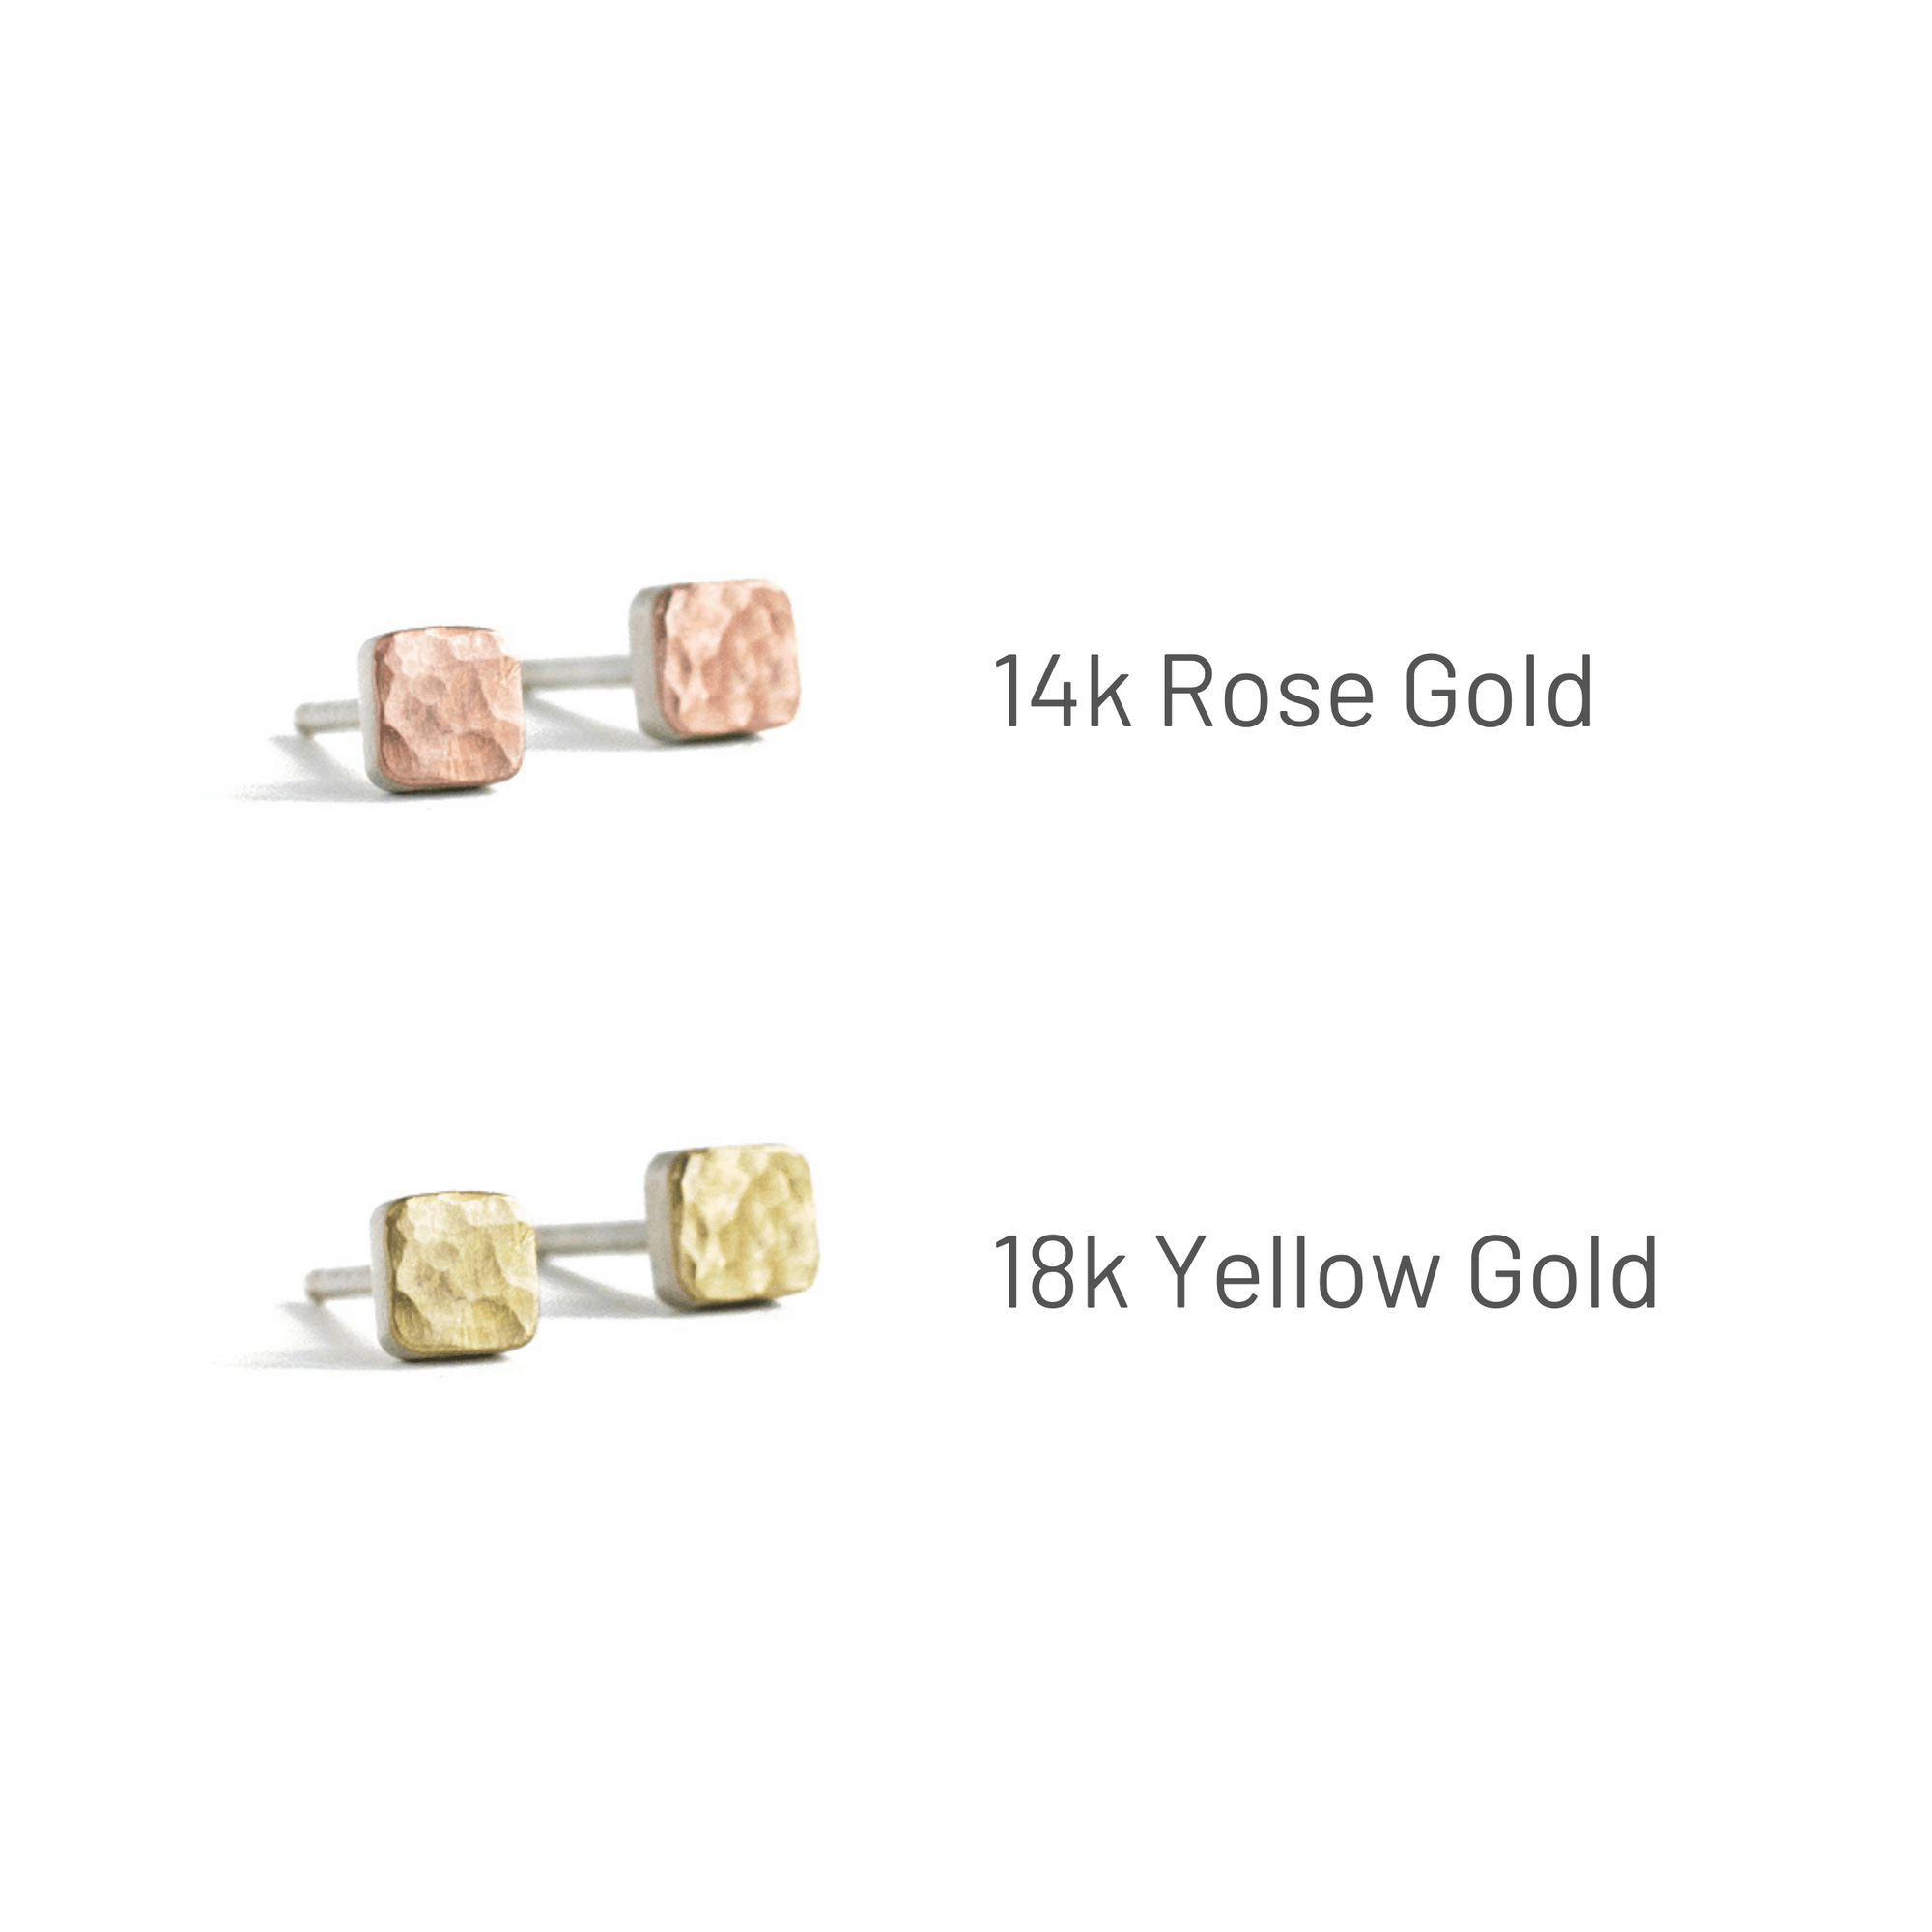 Hammered gold and silver studs in yellow gold and rose gold. Handmade with recycled metal.